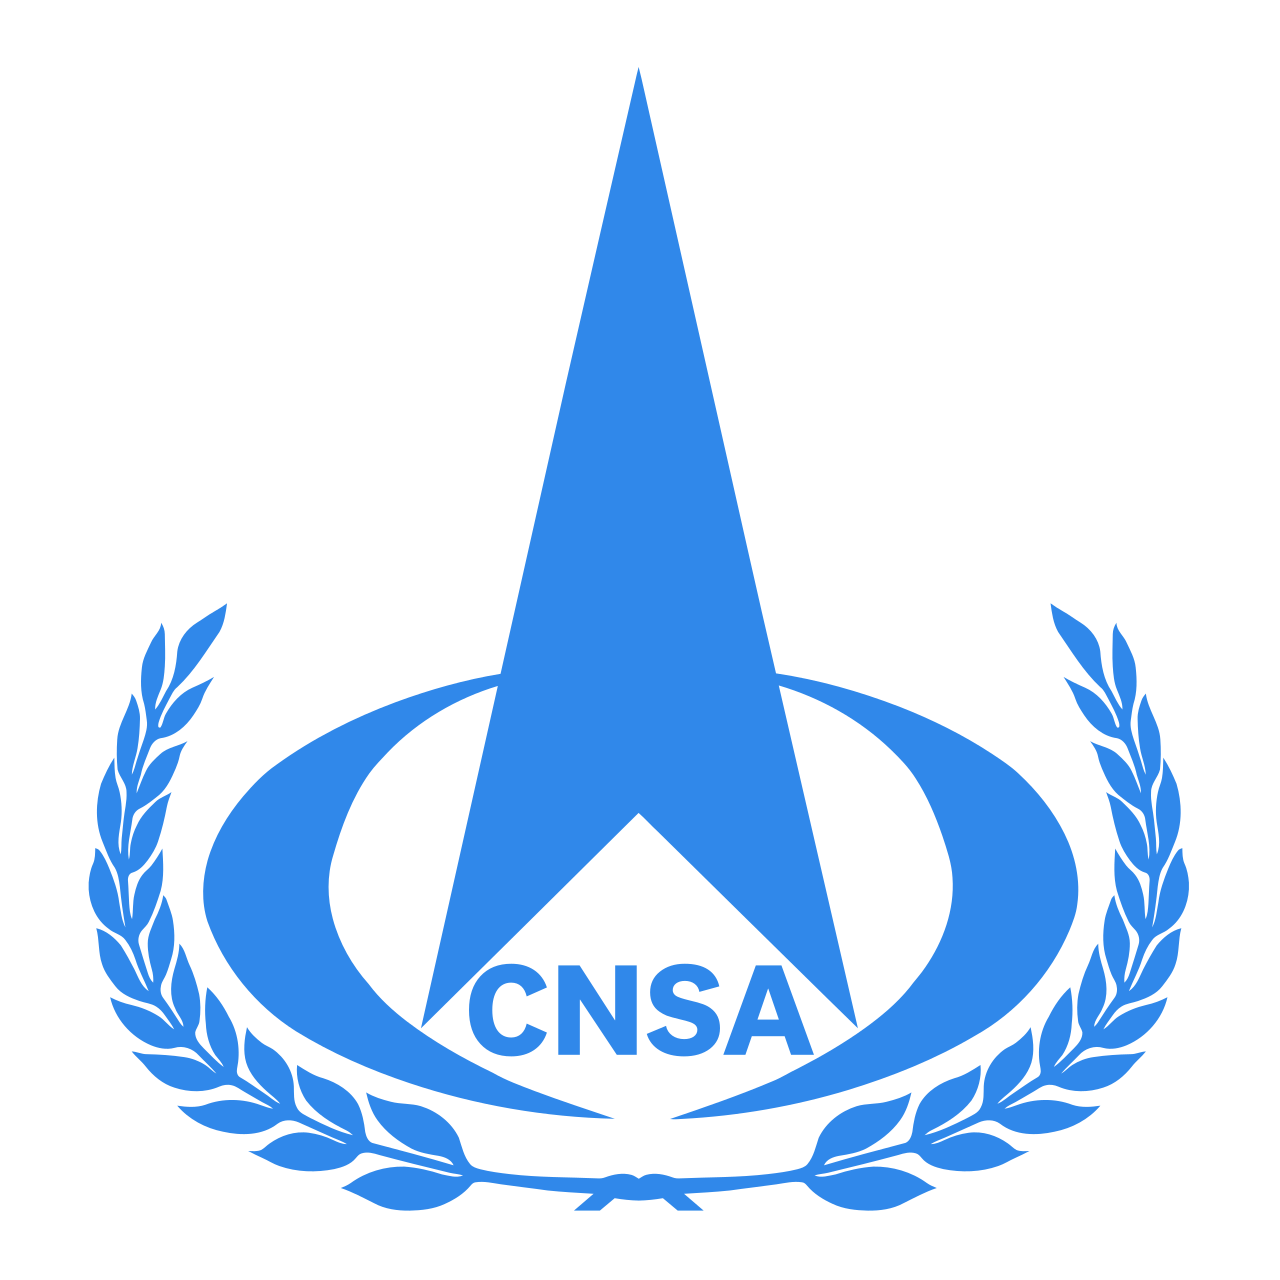 The logo of the China National Space Administration.